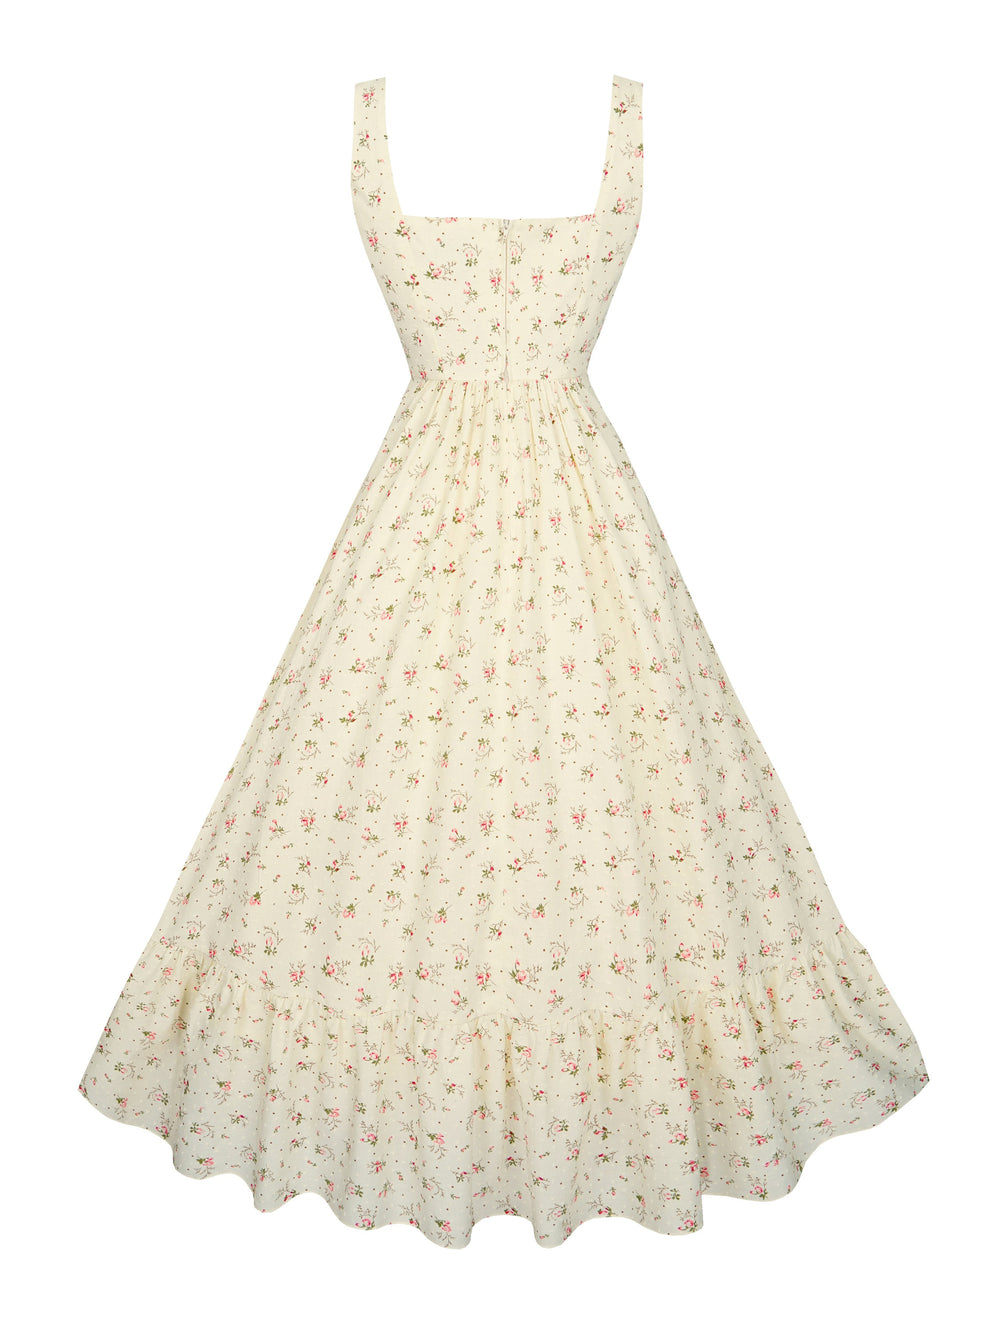 RTS - Size S - Henrietta Dress in Ivory "Ditzy Floral"